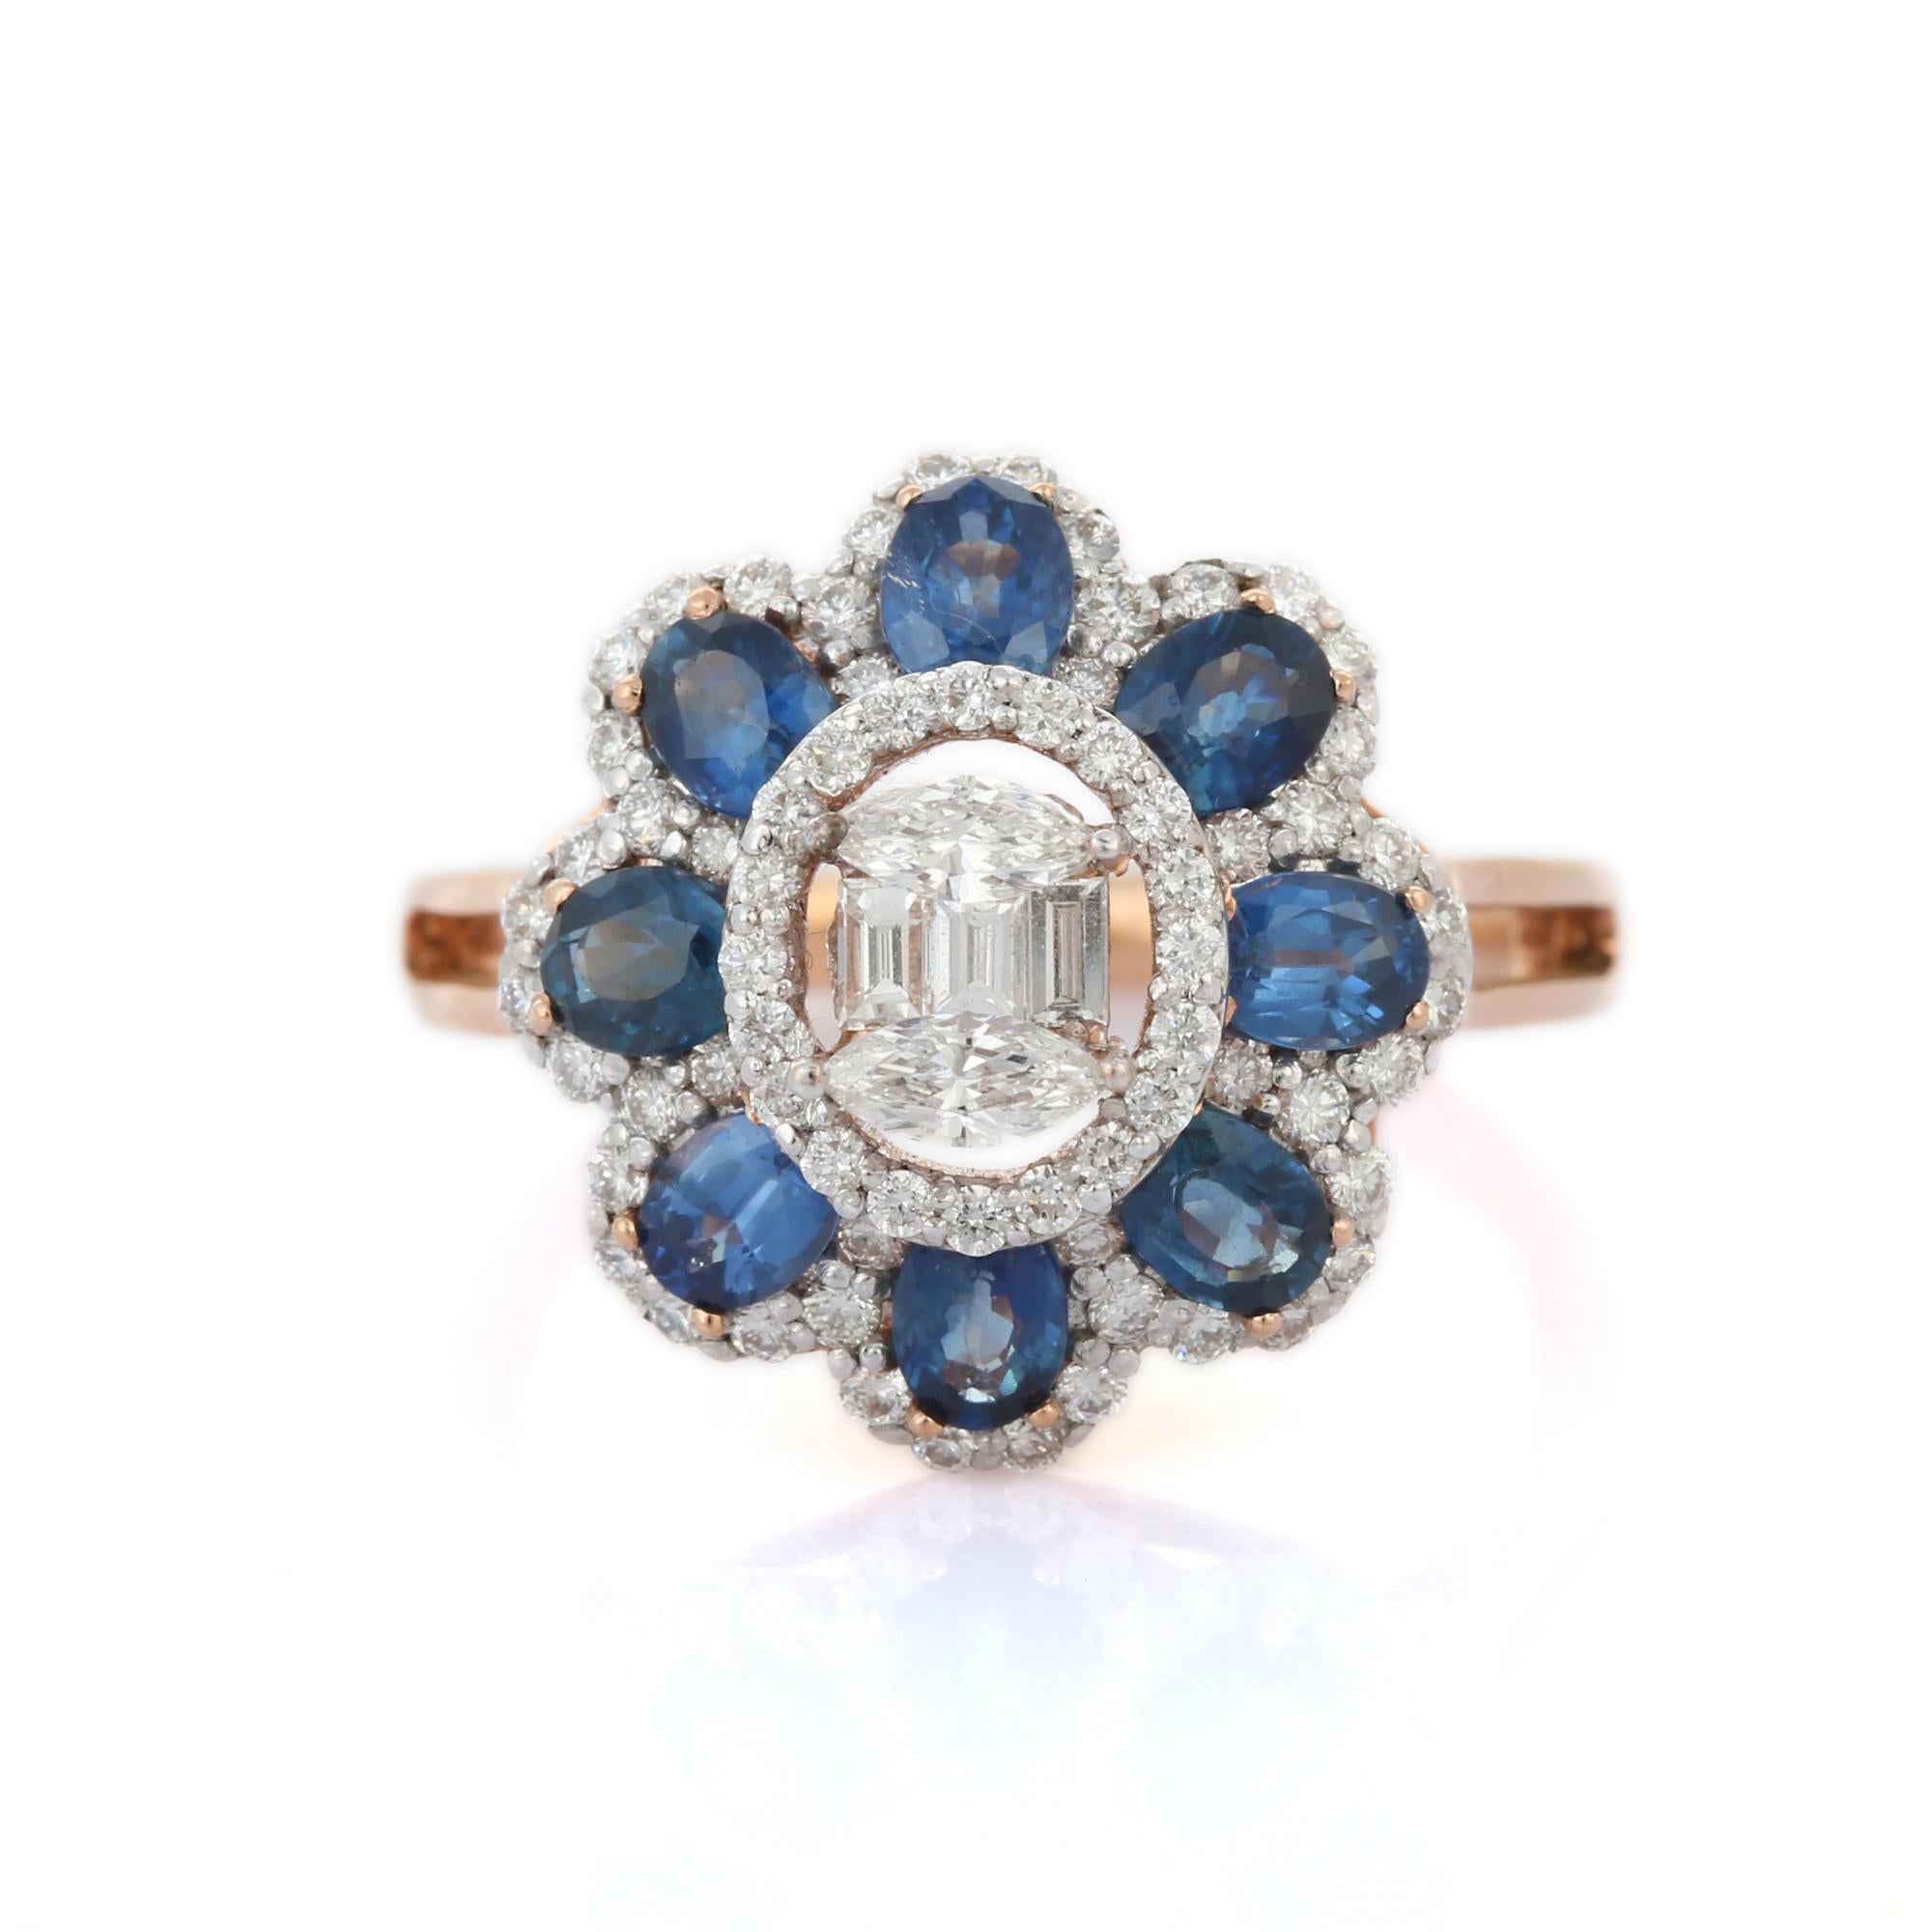 For Sale:  18K Solid Rose Gold 1.76 ct Sapphire Diamond Big Flower Wedding Ring 5